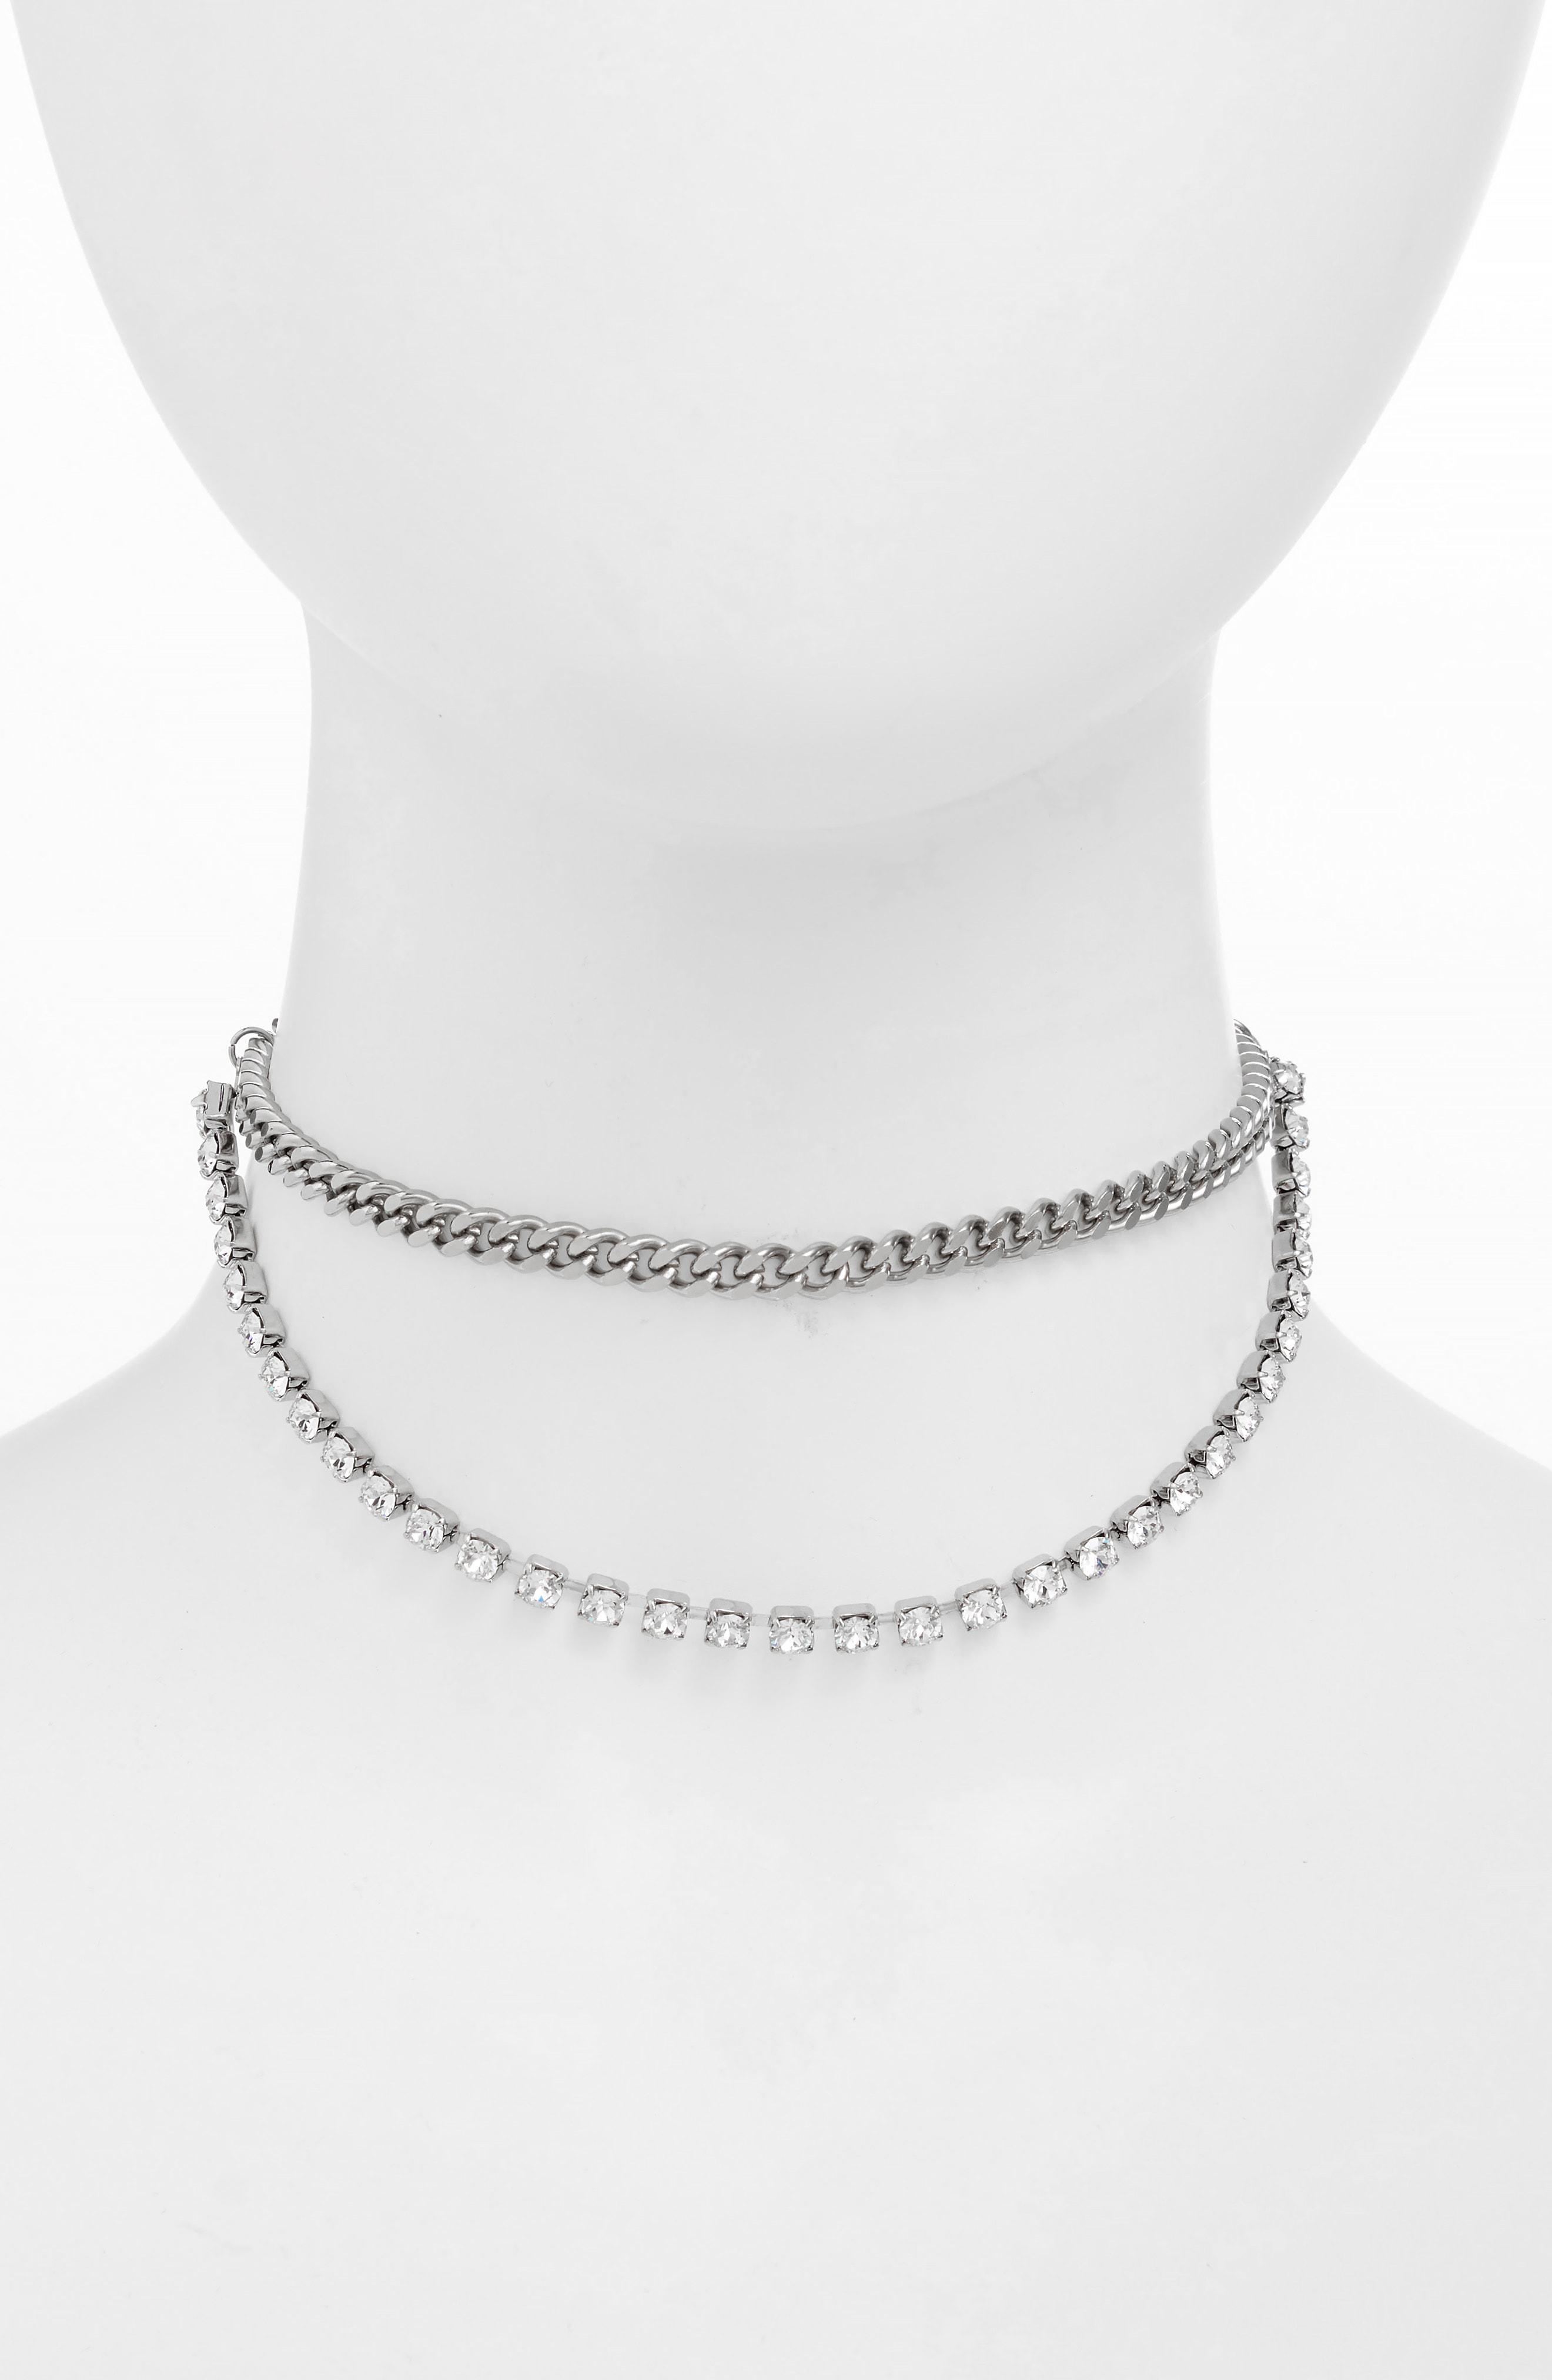 Lyst - Justine Clenquet Betty Layered Necklace in Metallic